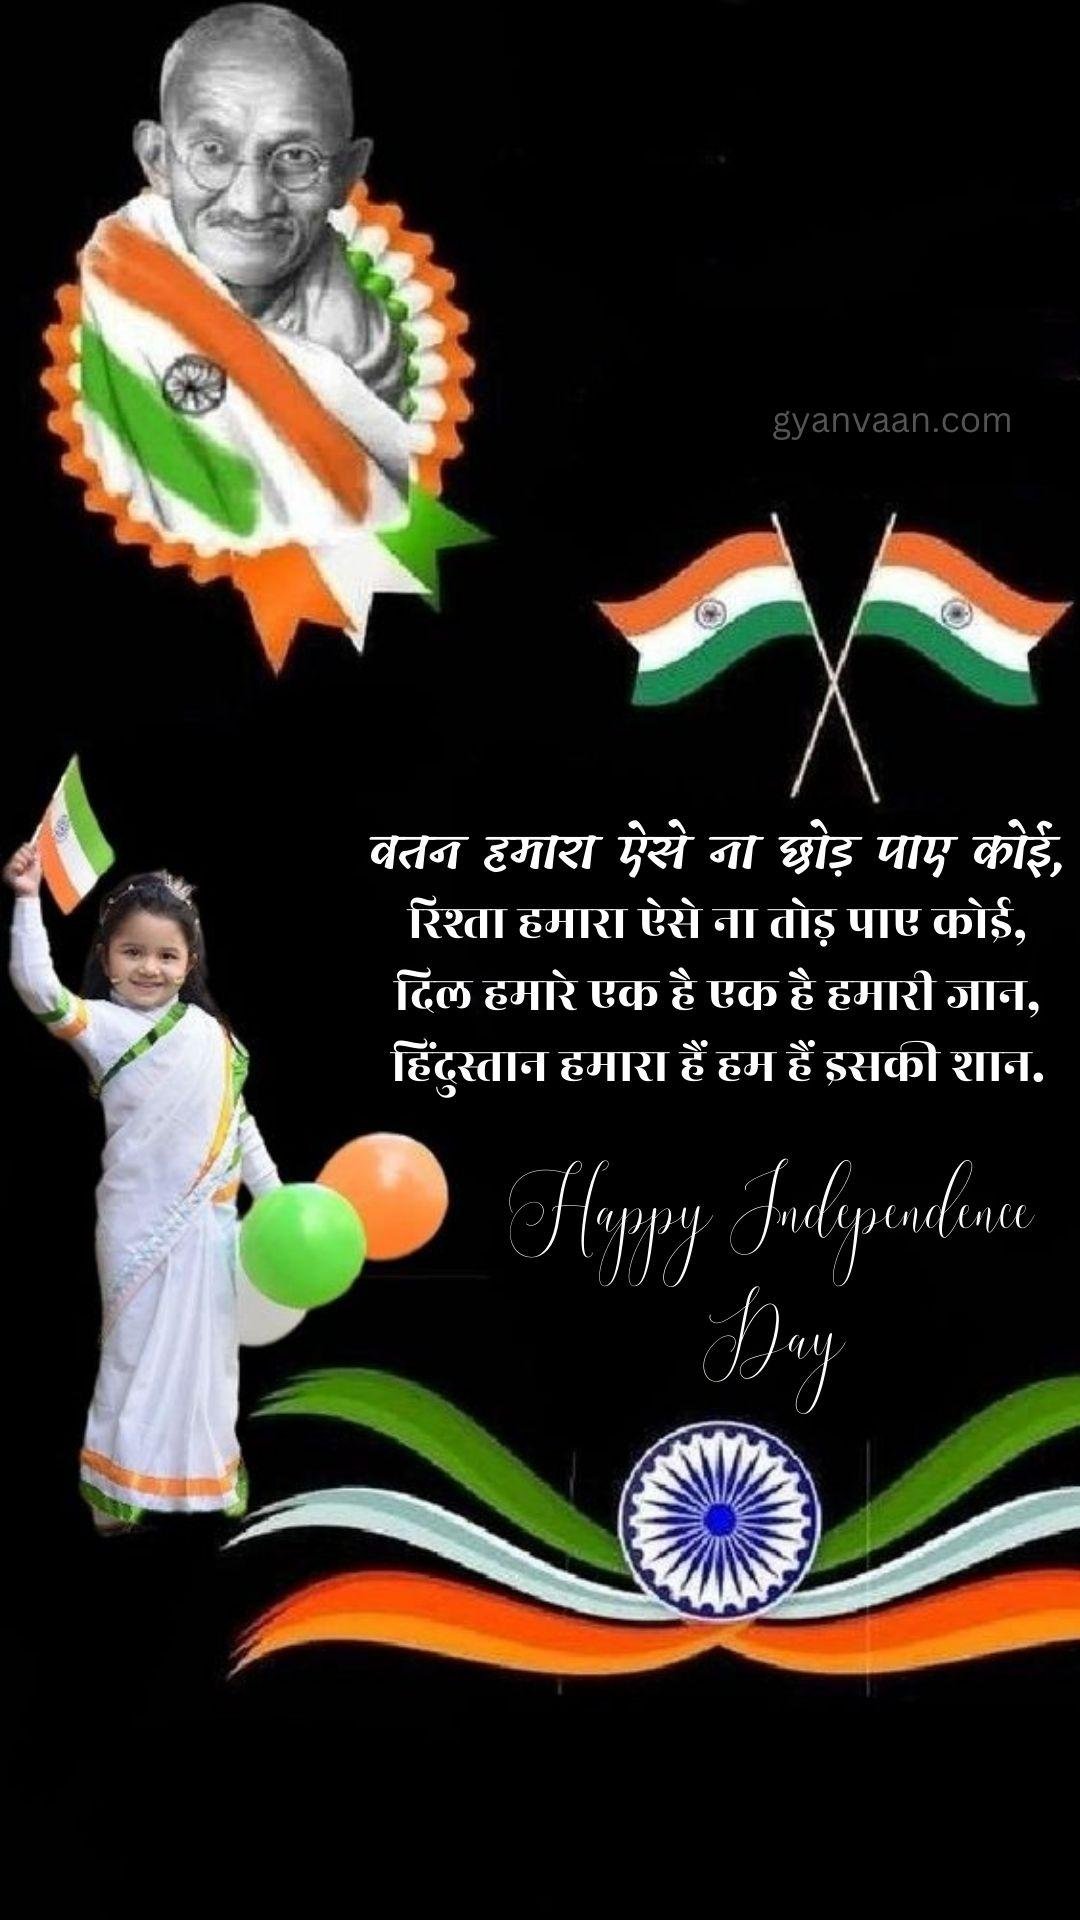 Independence Day Quotes In Hindi With Shayari Slogan Wishes For Whatsapp Status Mobile 15 - Independence Day Quotes In Hindi